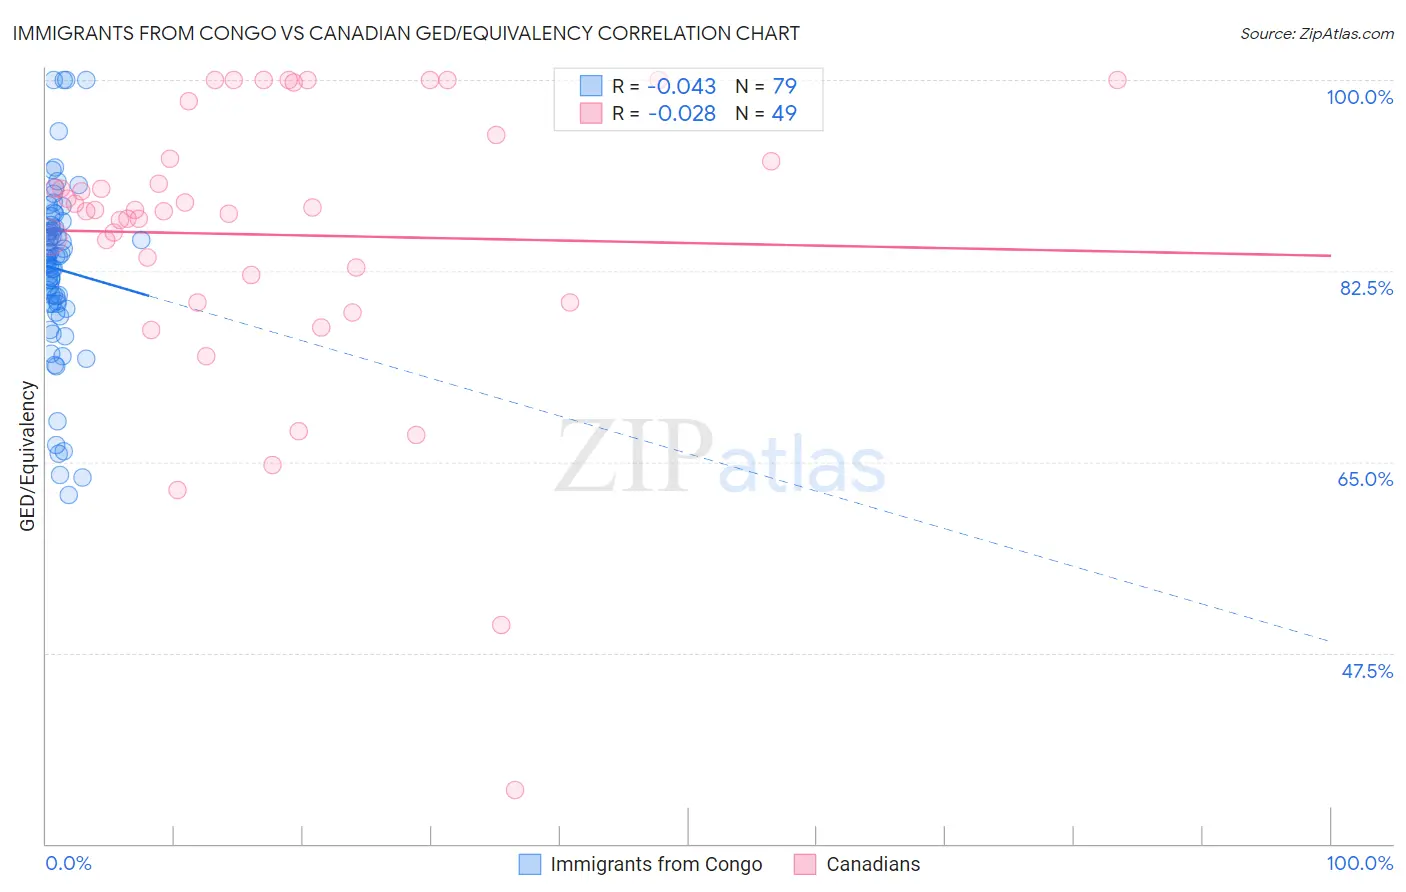 Immigrants from Congo vs Canadian GED/Equivalency